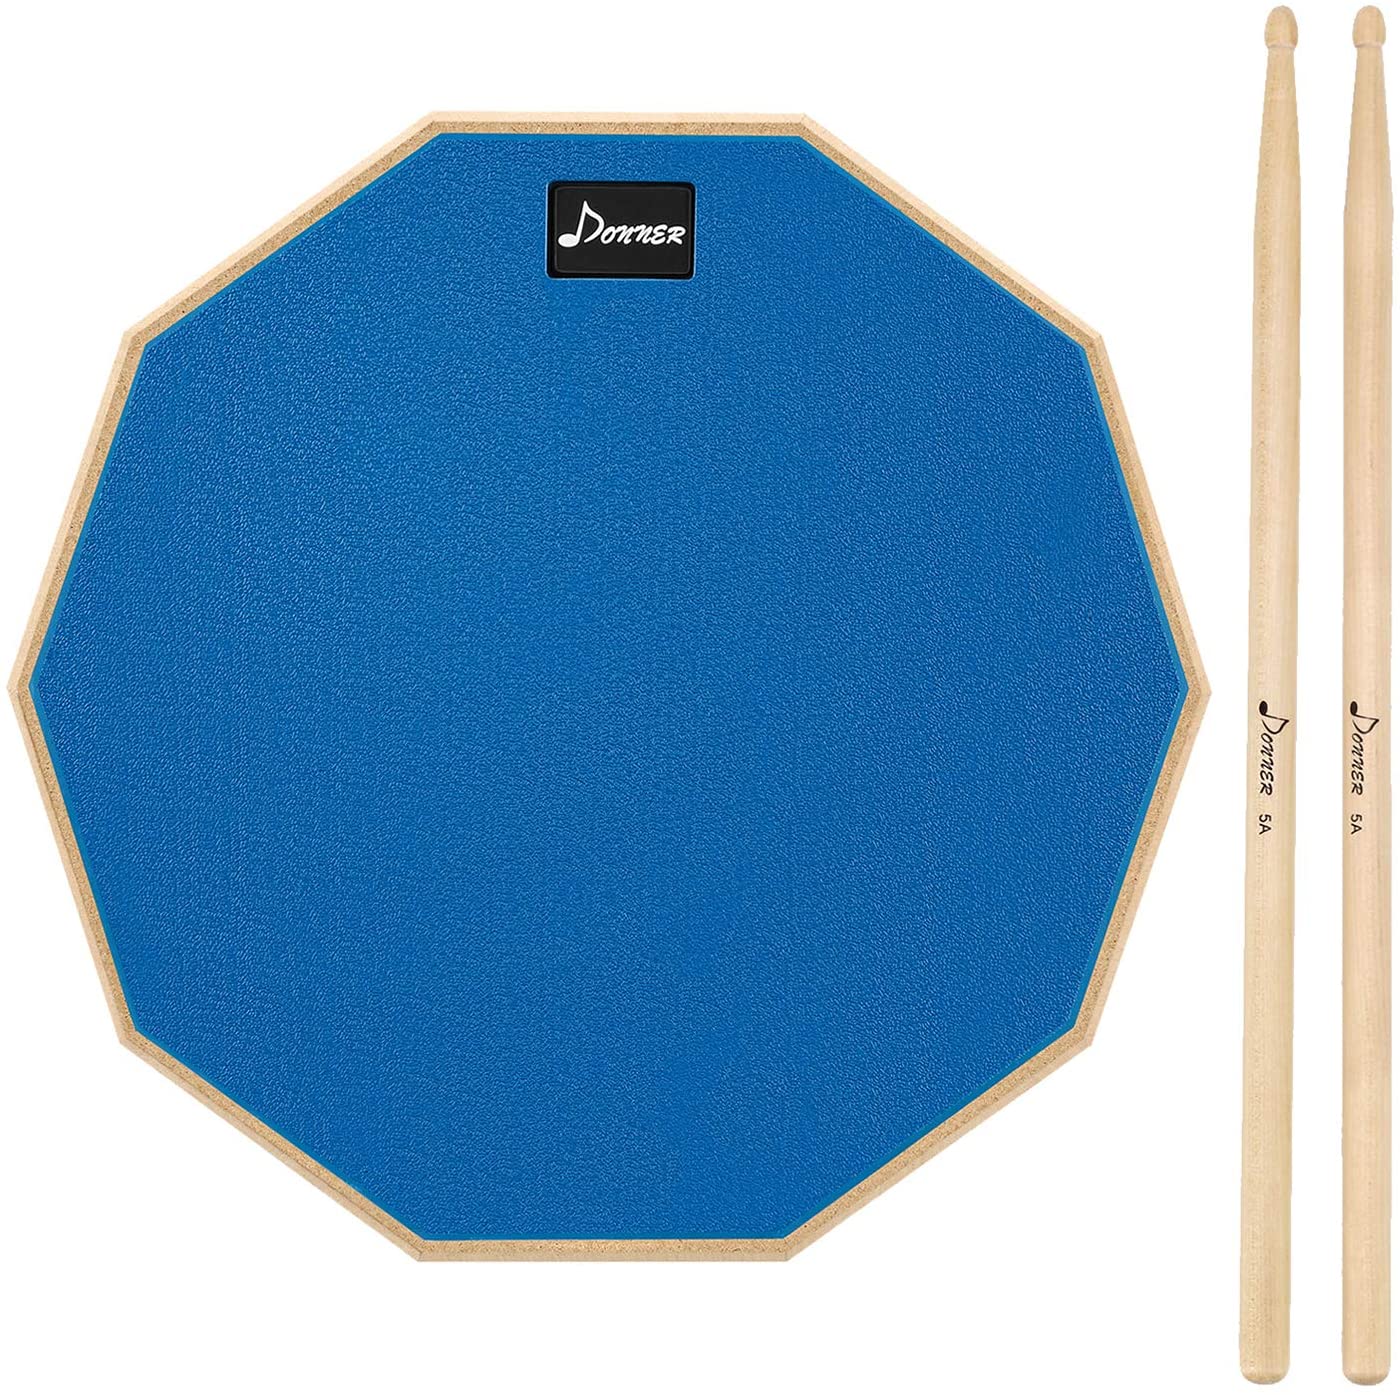 

Donner Drum Practice Pad, 12 Inch Double Sided Silent Drum Pad With Drumsticks, Blue